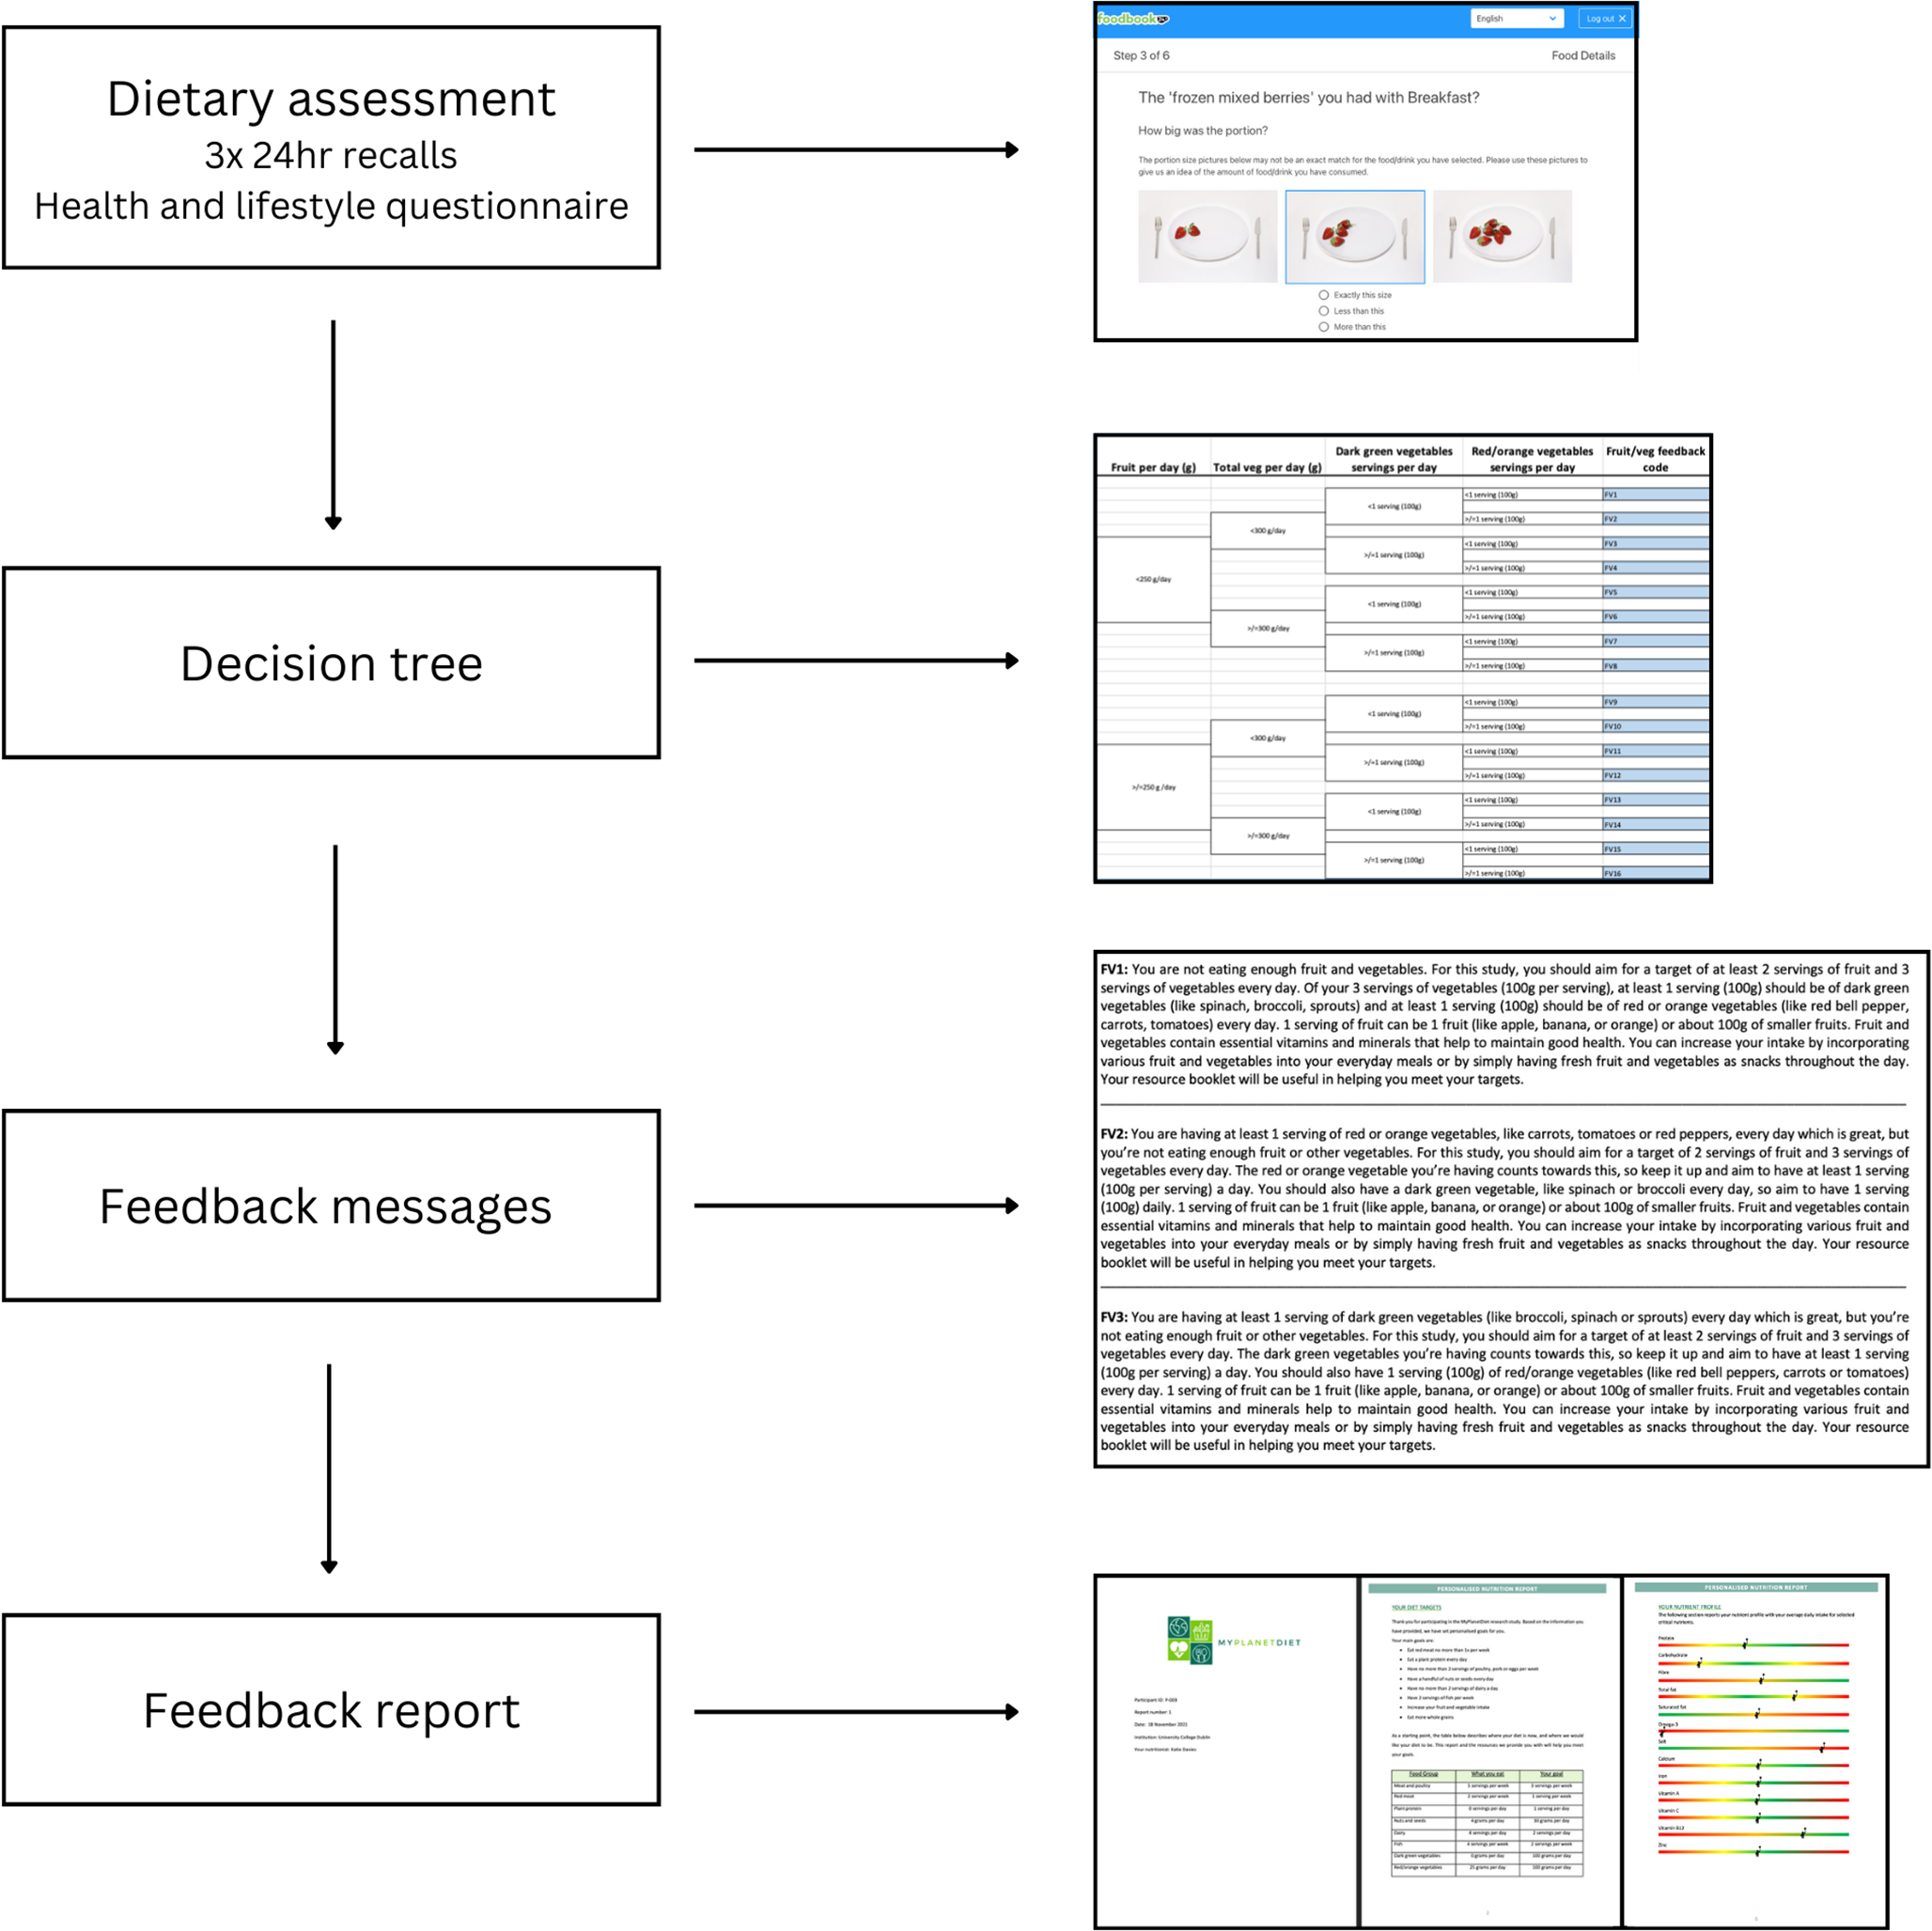 Developing and testing personalised nutrition feedback for more sustainable healthy diets: the MyPlanetDiet randomised controlled trial protocol